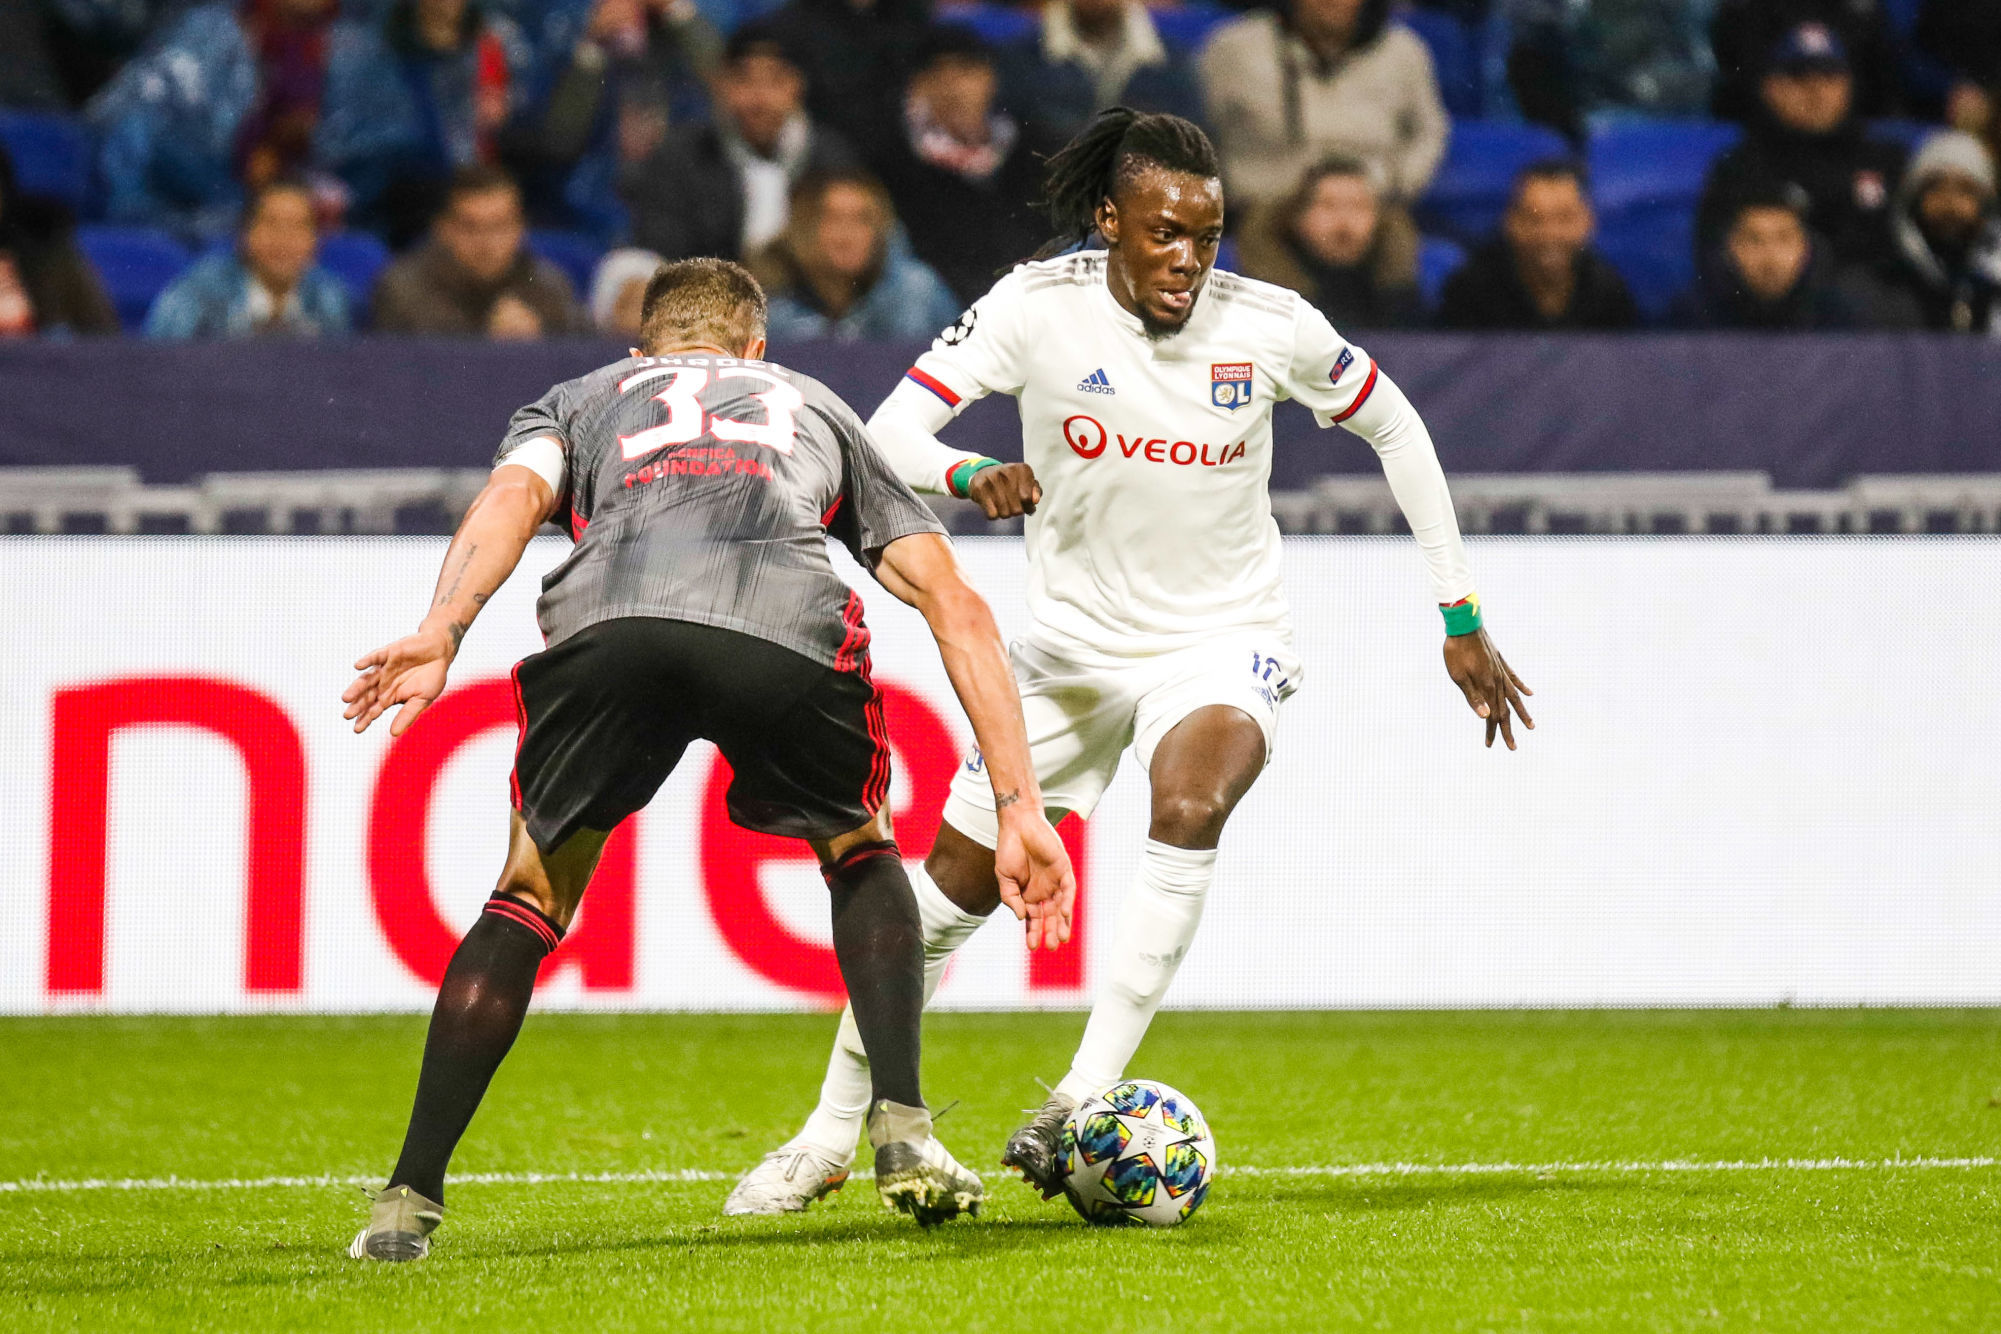 Bertrand TRAORE of Lyon and JARDEL of Benfica during the Champions League match Lyon and Benfica at Parc Olympique on November 5, 2019 in Lyon, France. (Photo by Romain Biard/Icon Sport)  - Bertrand TRAORE - JARDEL - Groupama Stadium - Lyon (France)